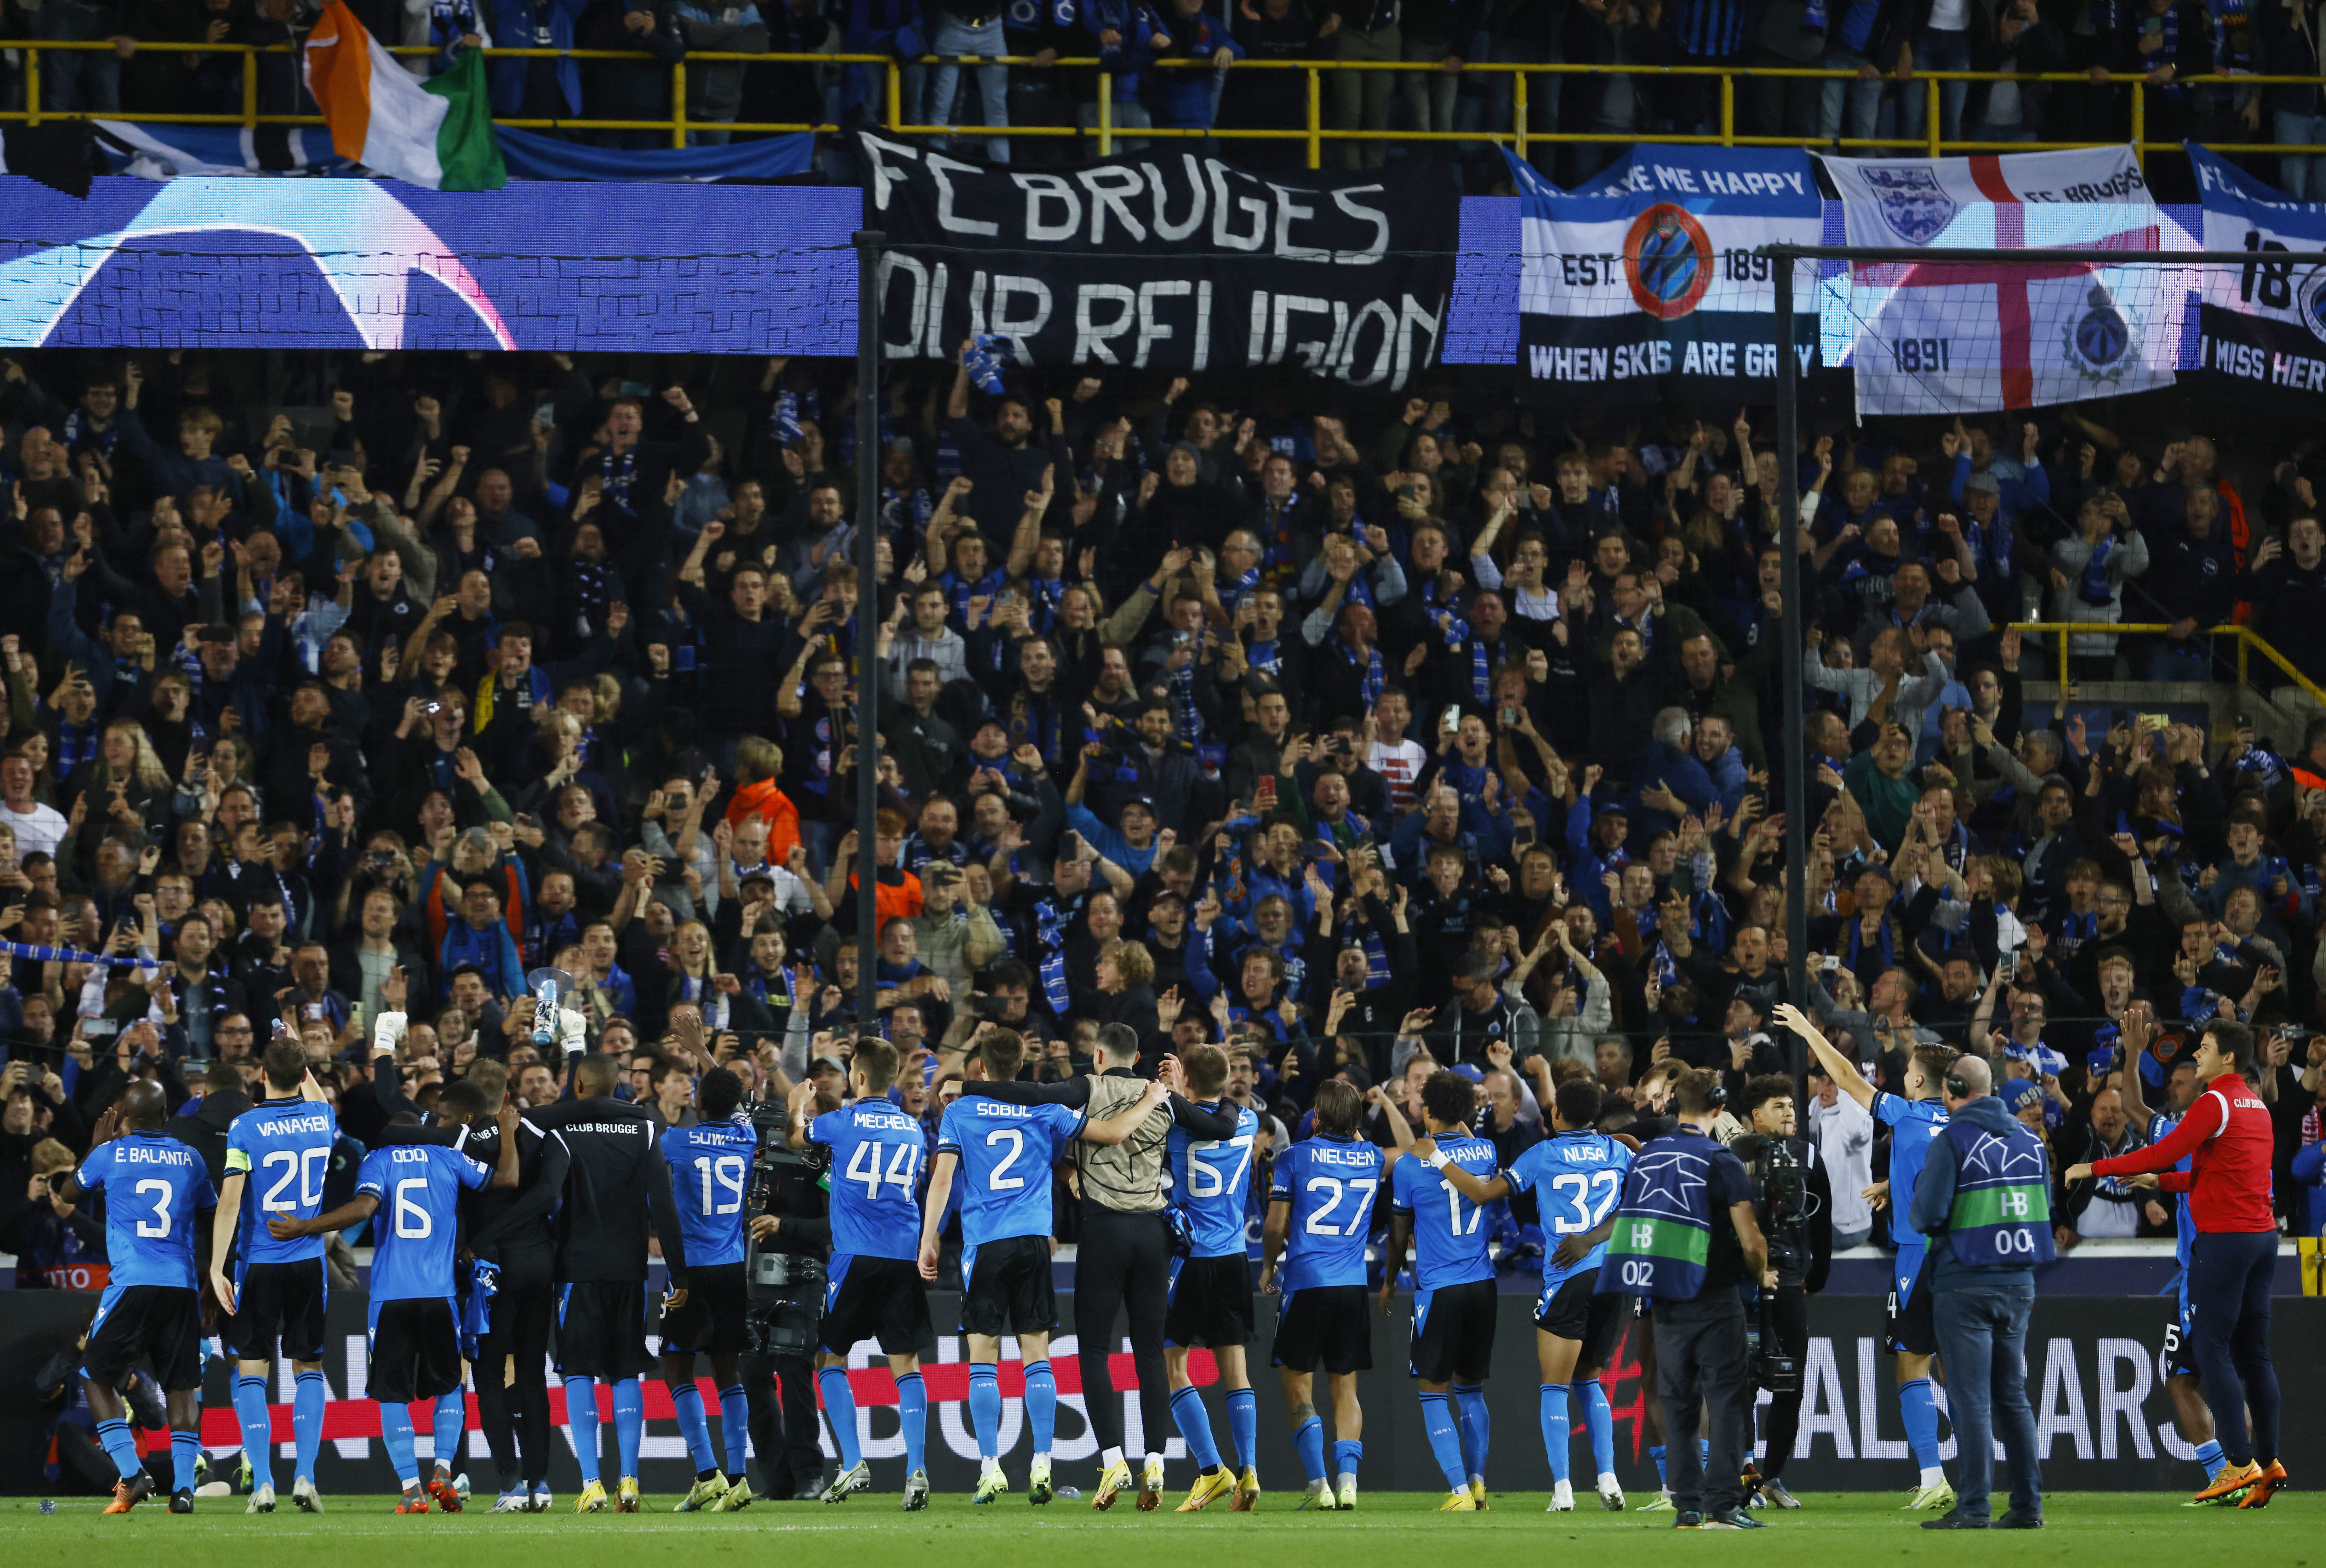 Brugge running on fumes of self-belief in Champions League